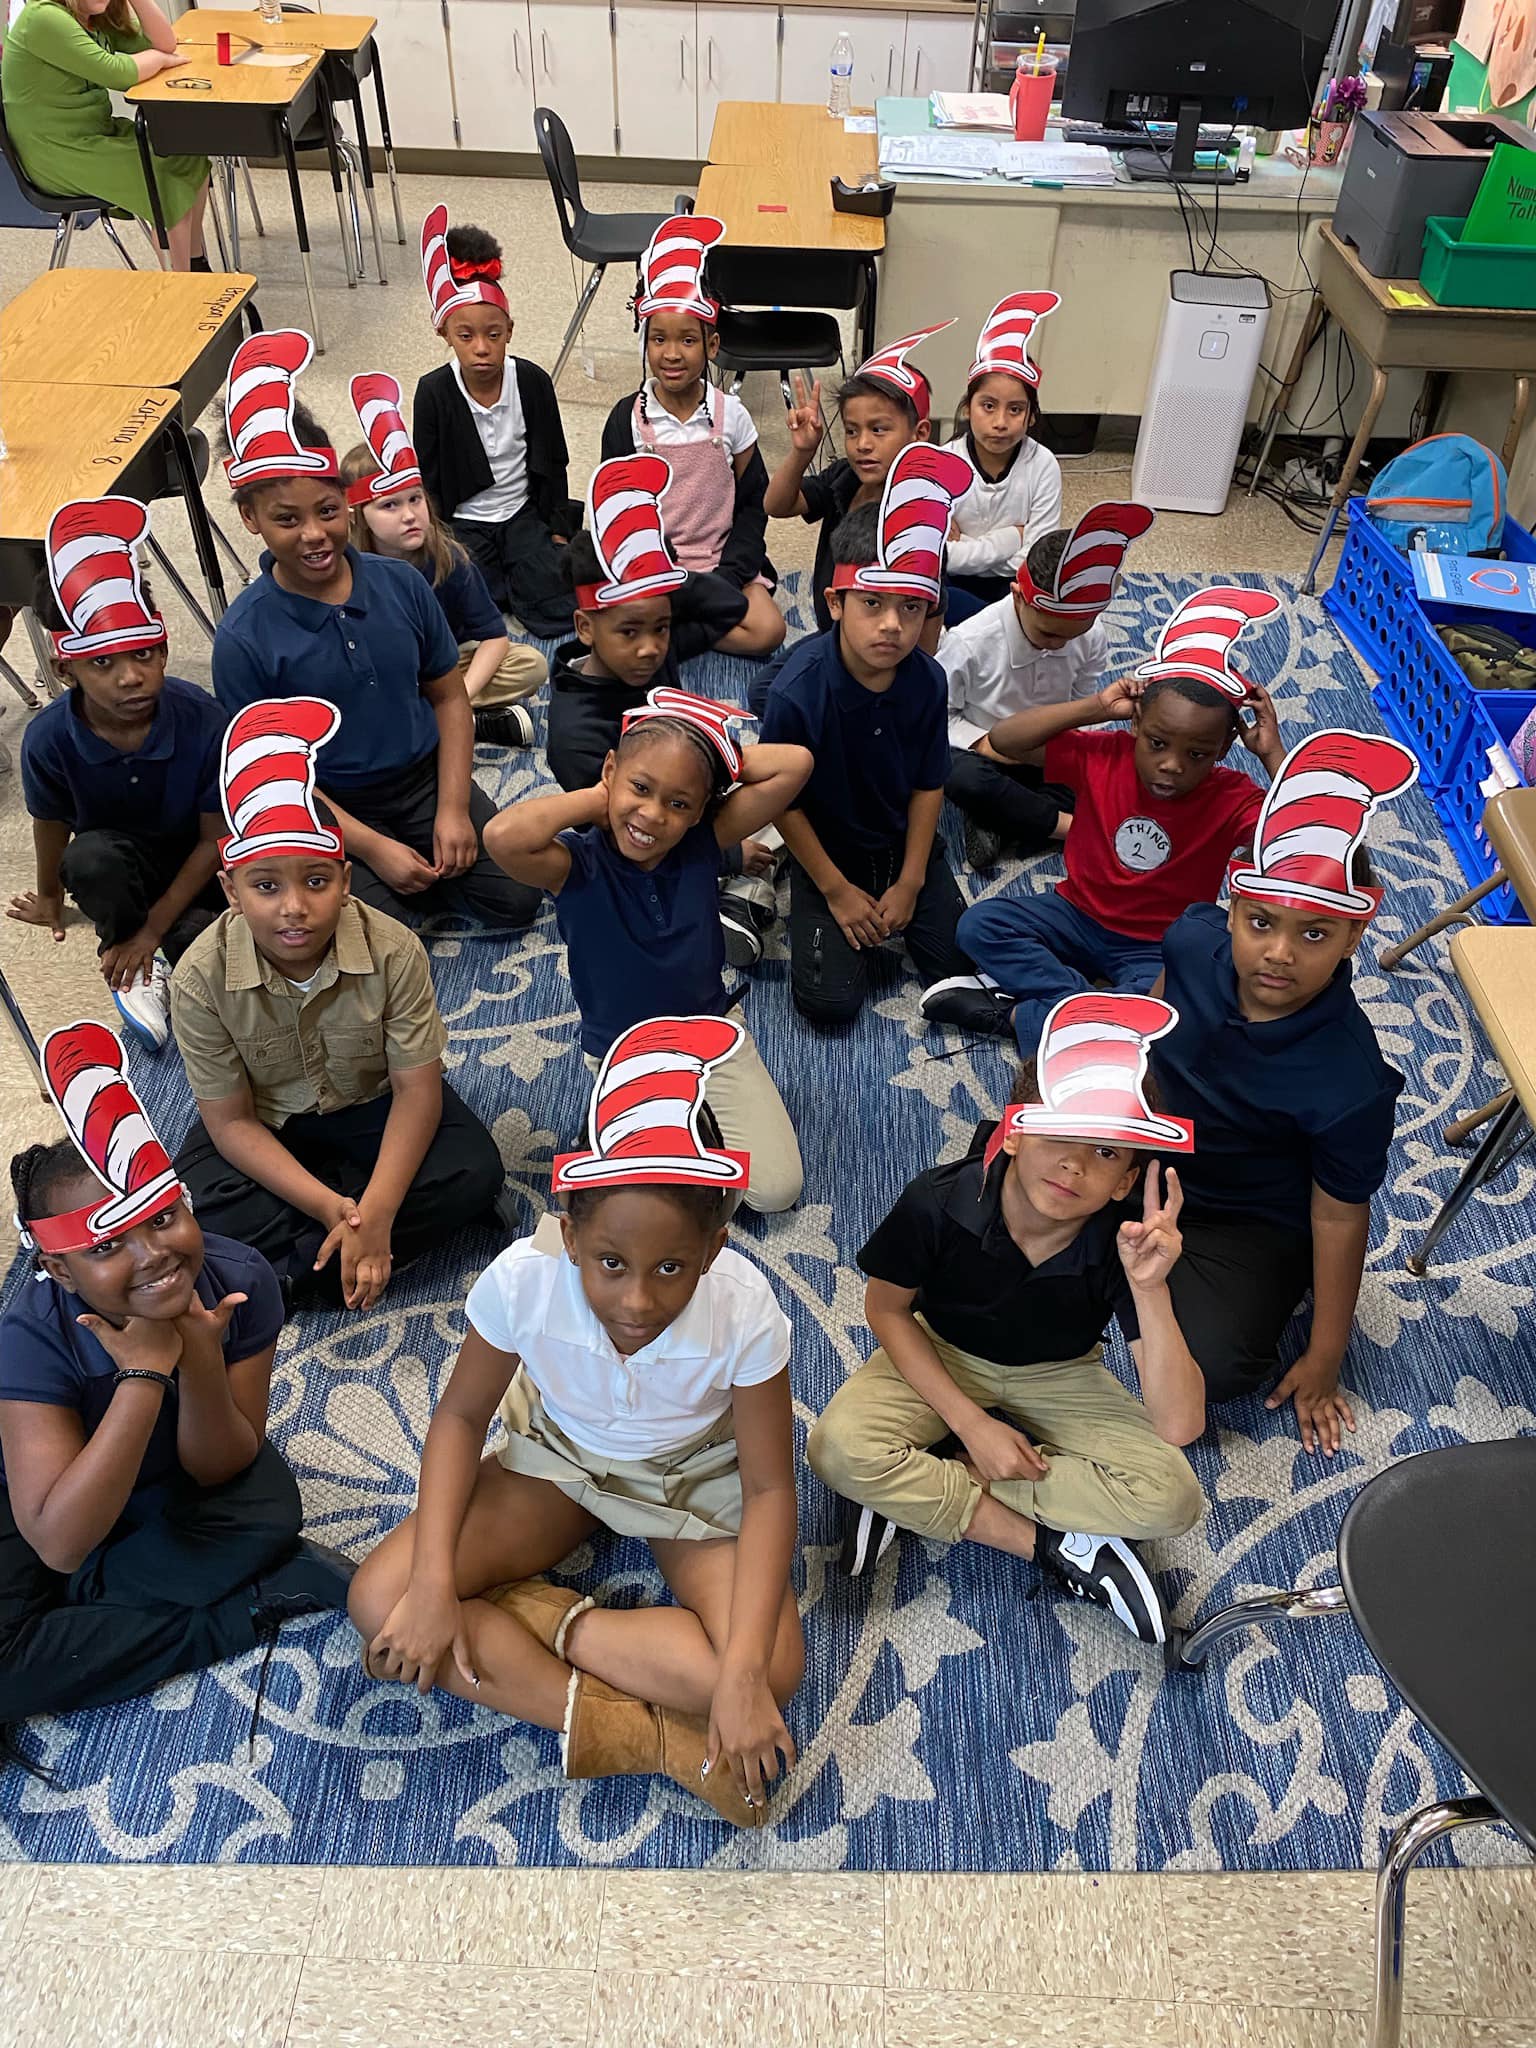 Group of students with Dr. Seuss hats on